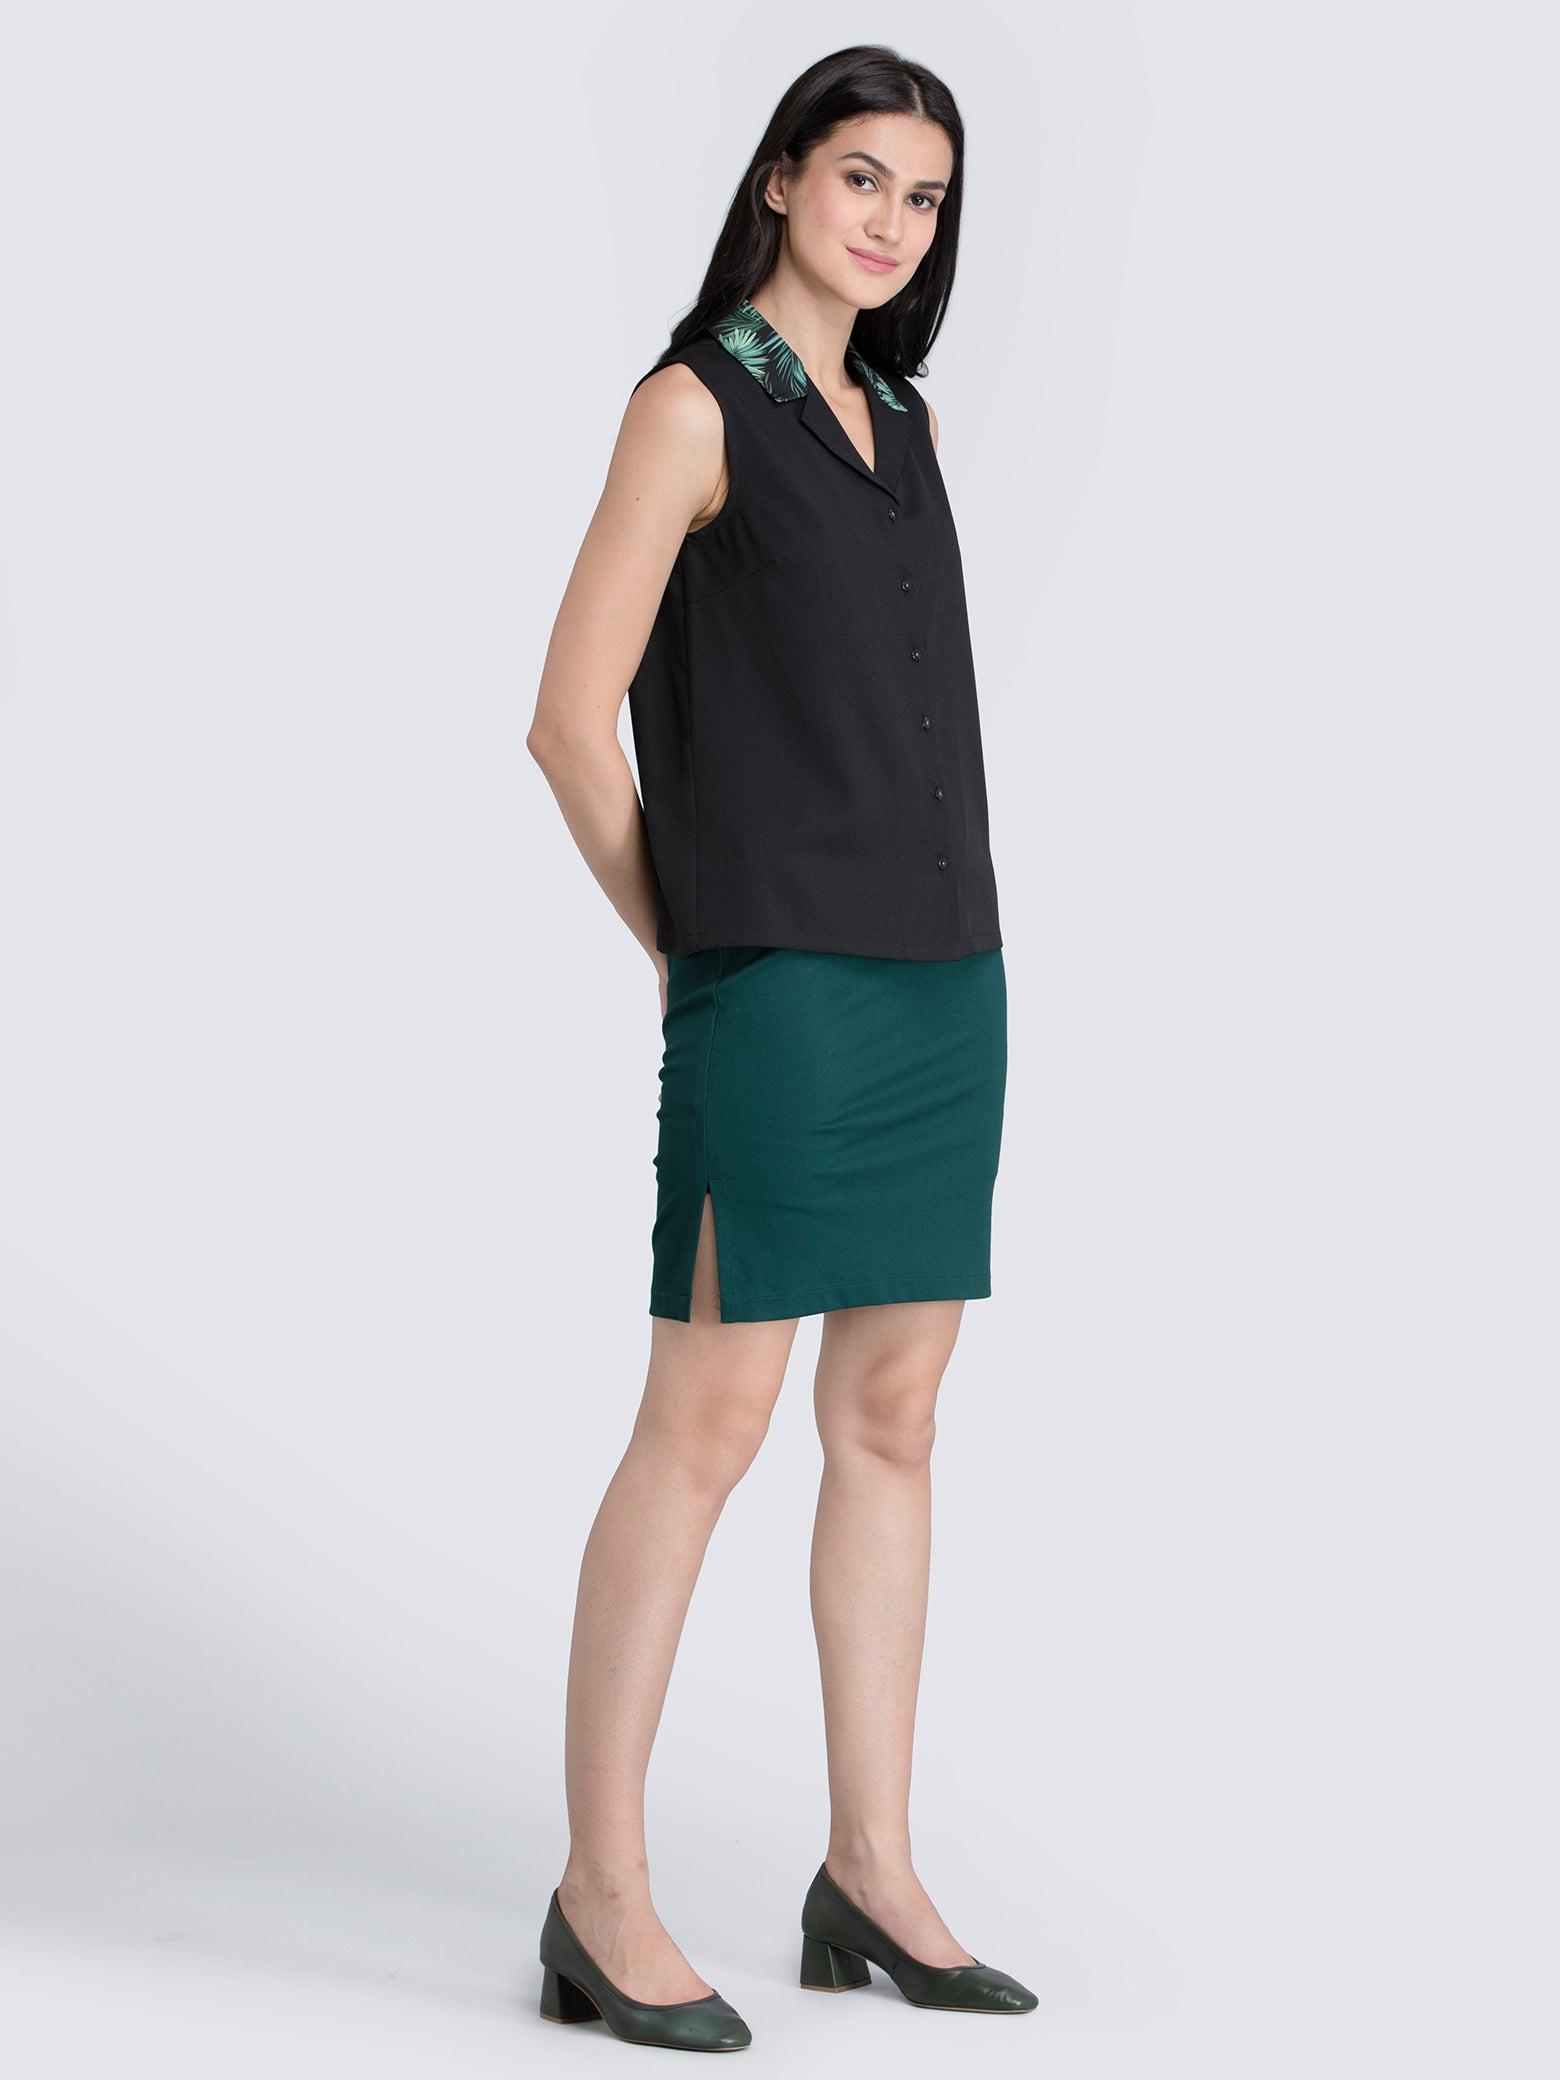 Notch Collar Shirt With Colour Block - Black| Formal Tops